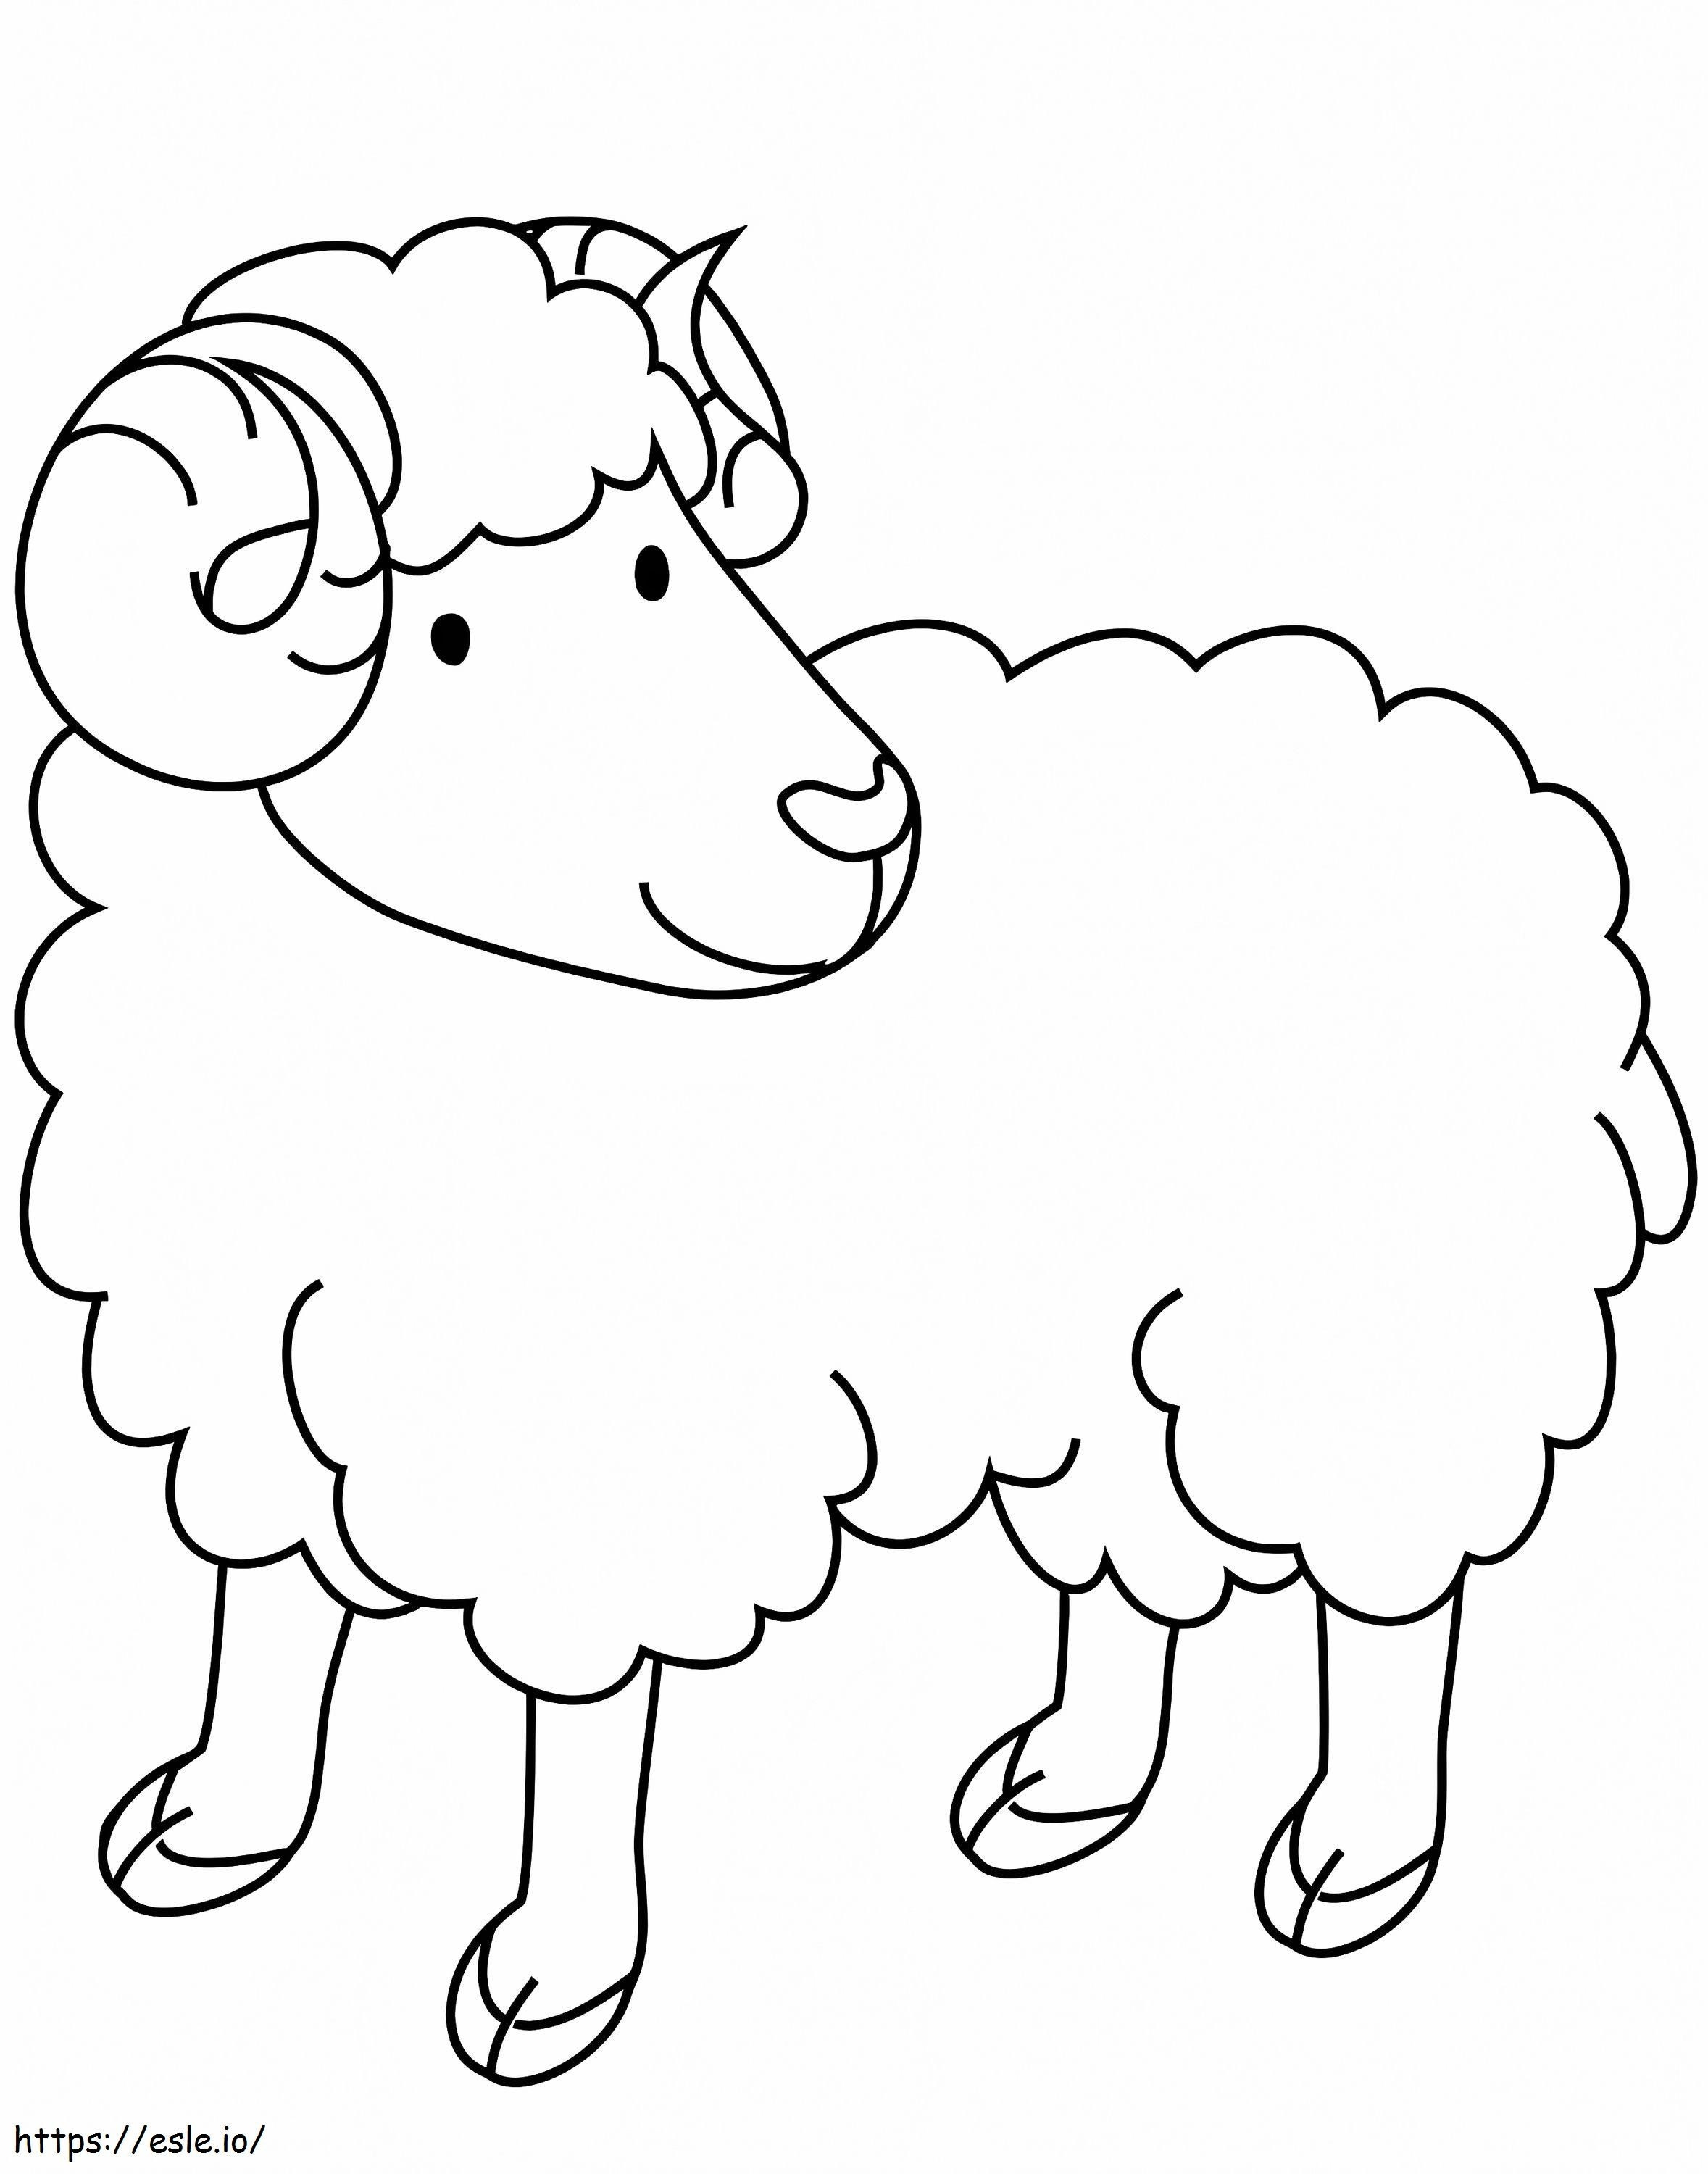 A Cute Ram coloring page